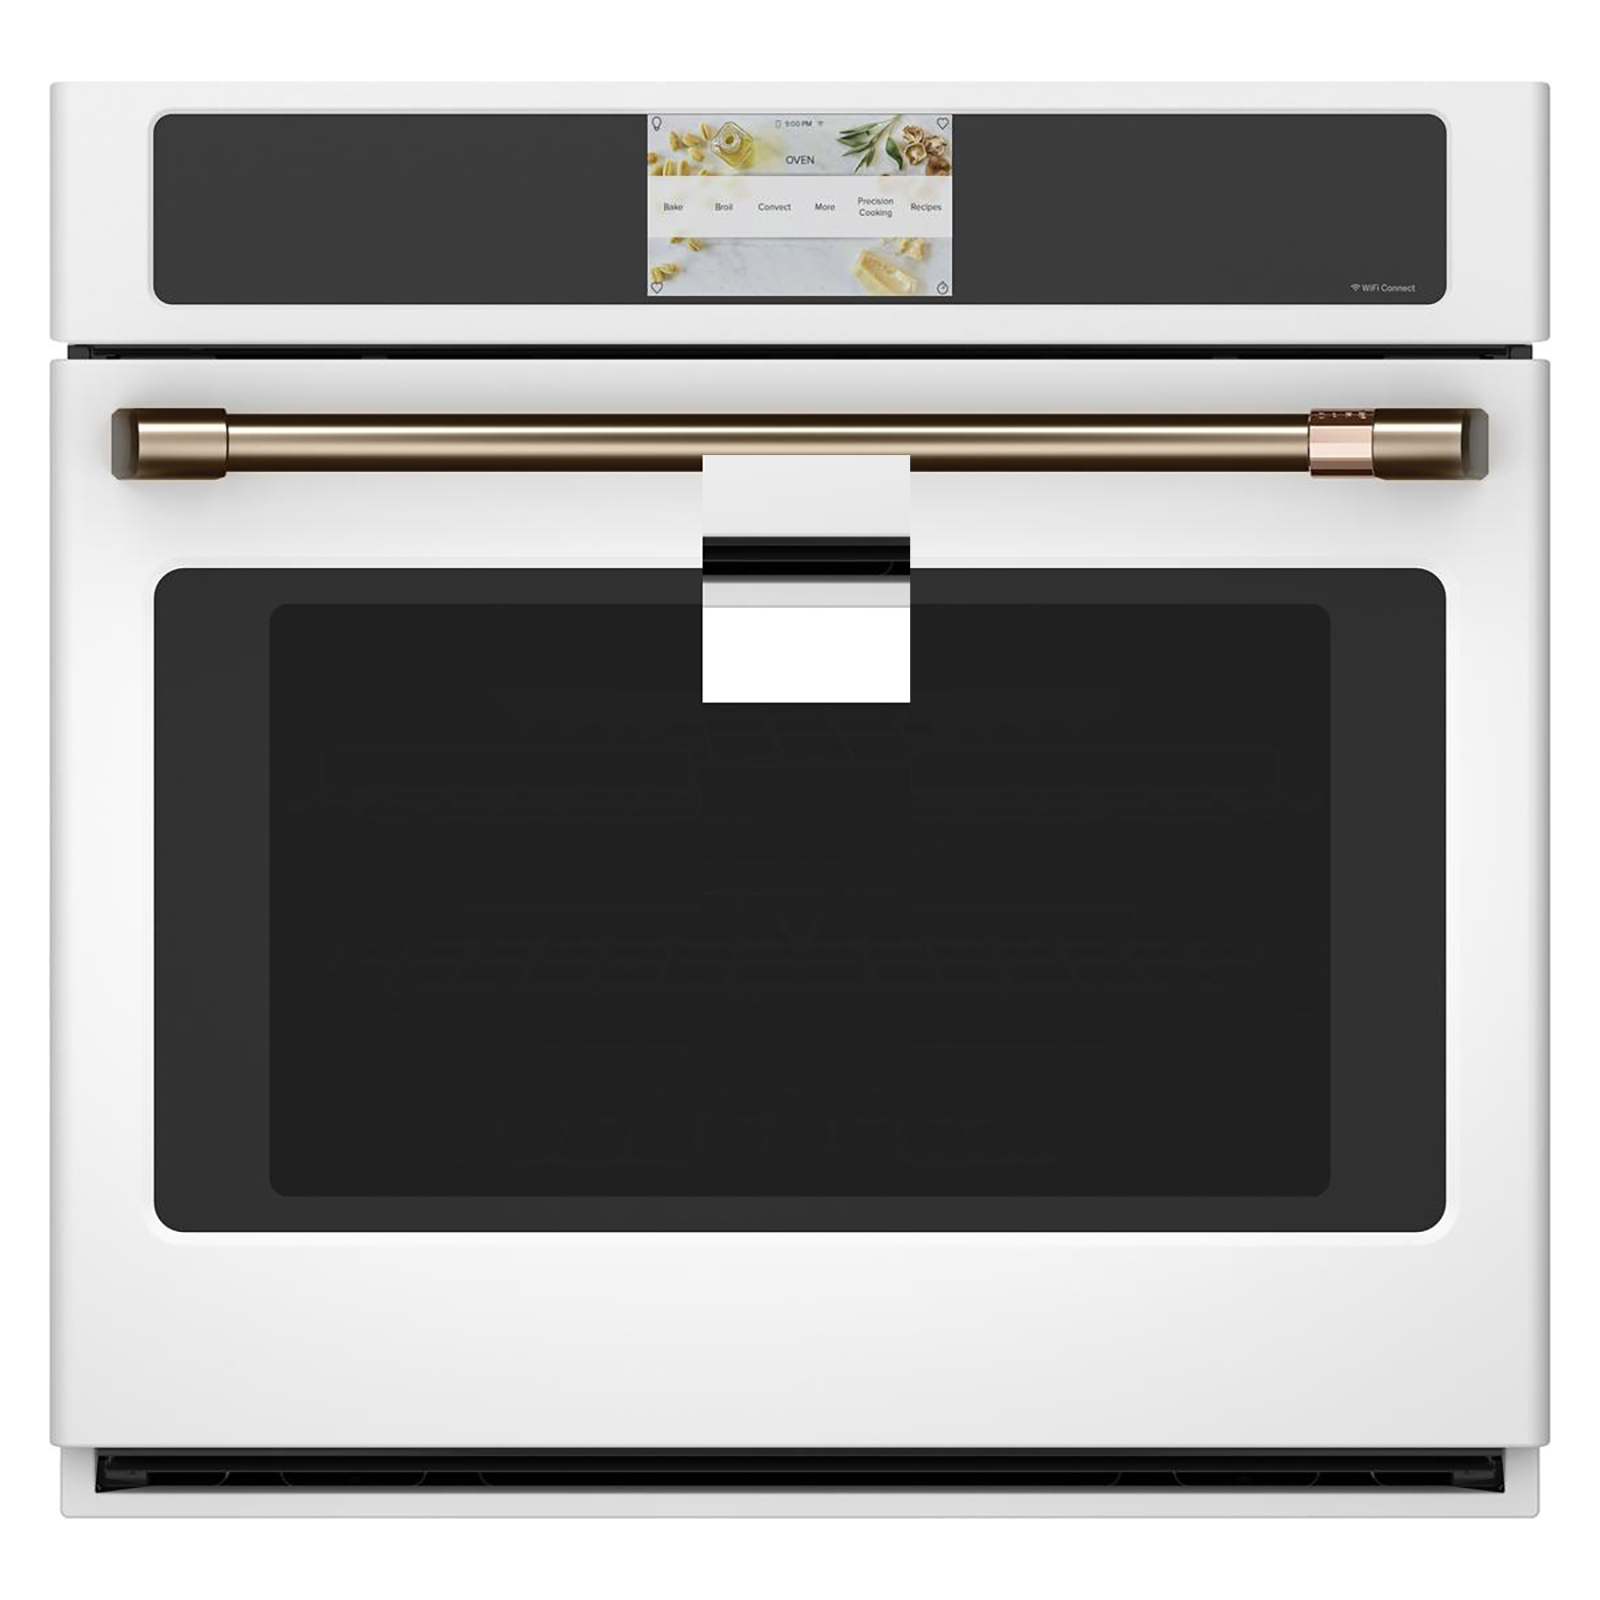 CAFE CTS90DP4NW2 30" Professional Smart Built-In Convection Single Wall Oven